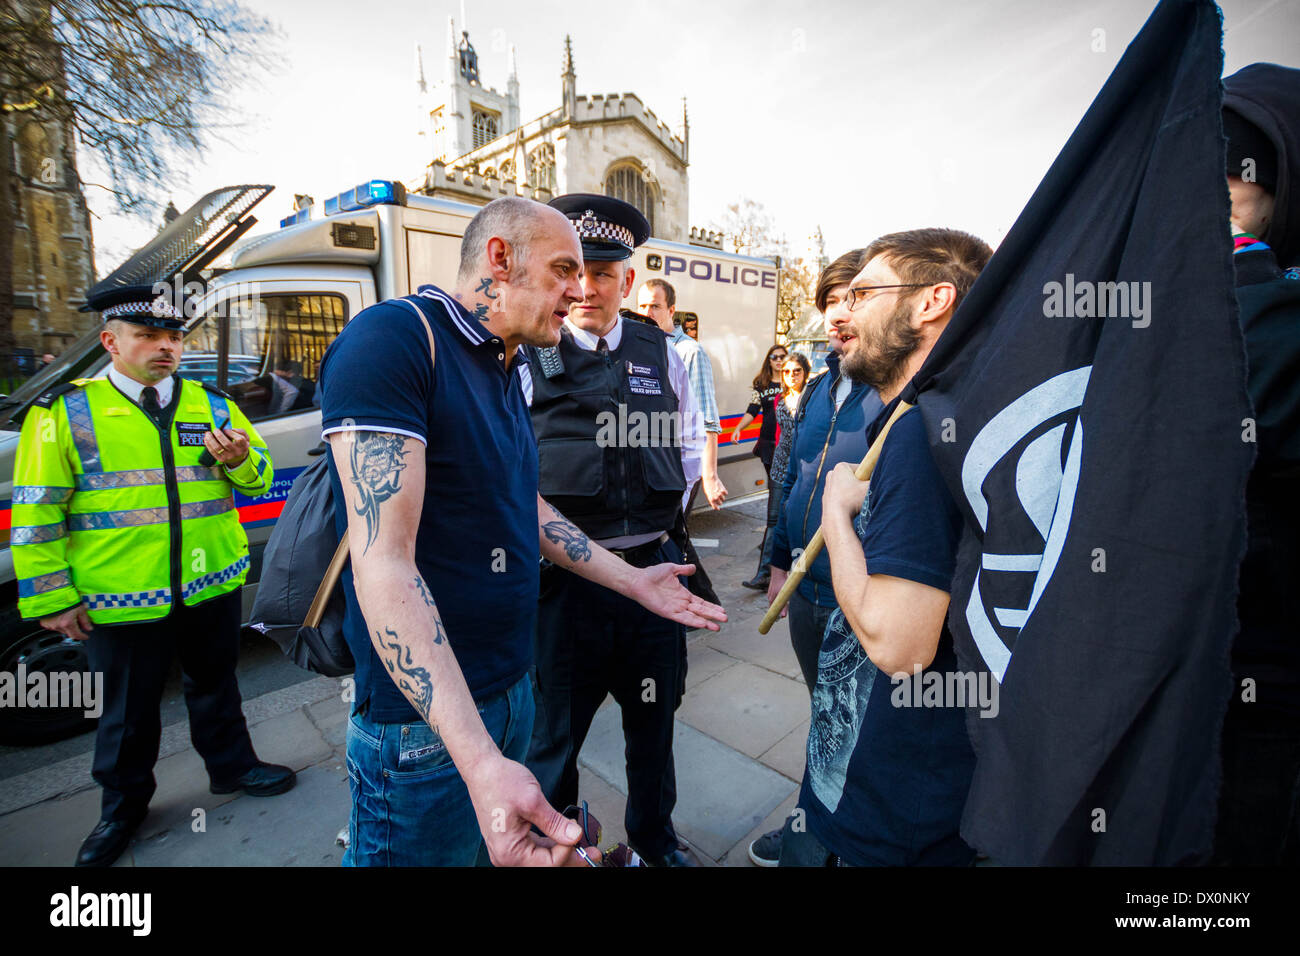 Anti-Fascist (UAF) groups clash with EVF protest march in London Stock Photo